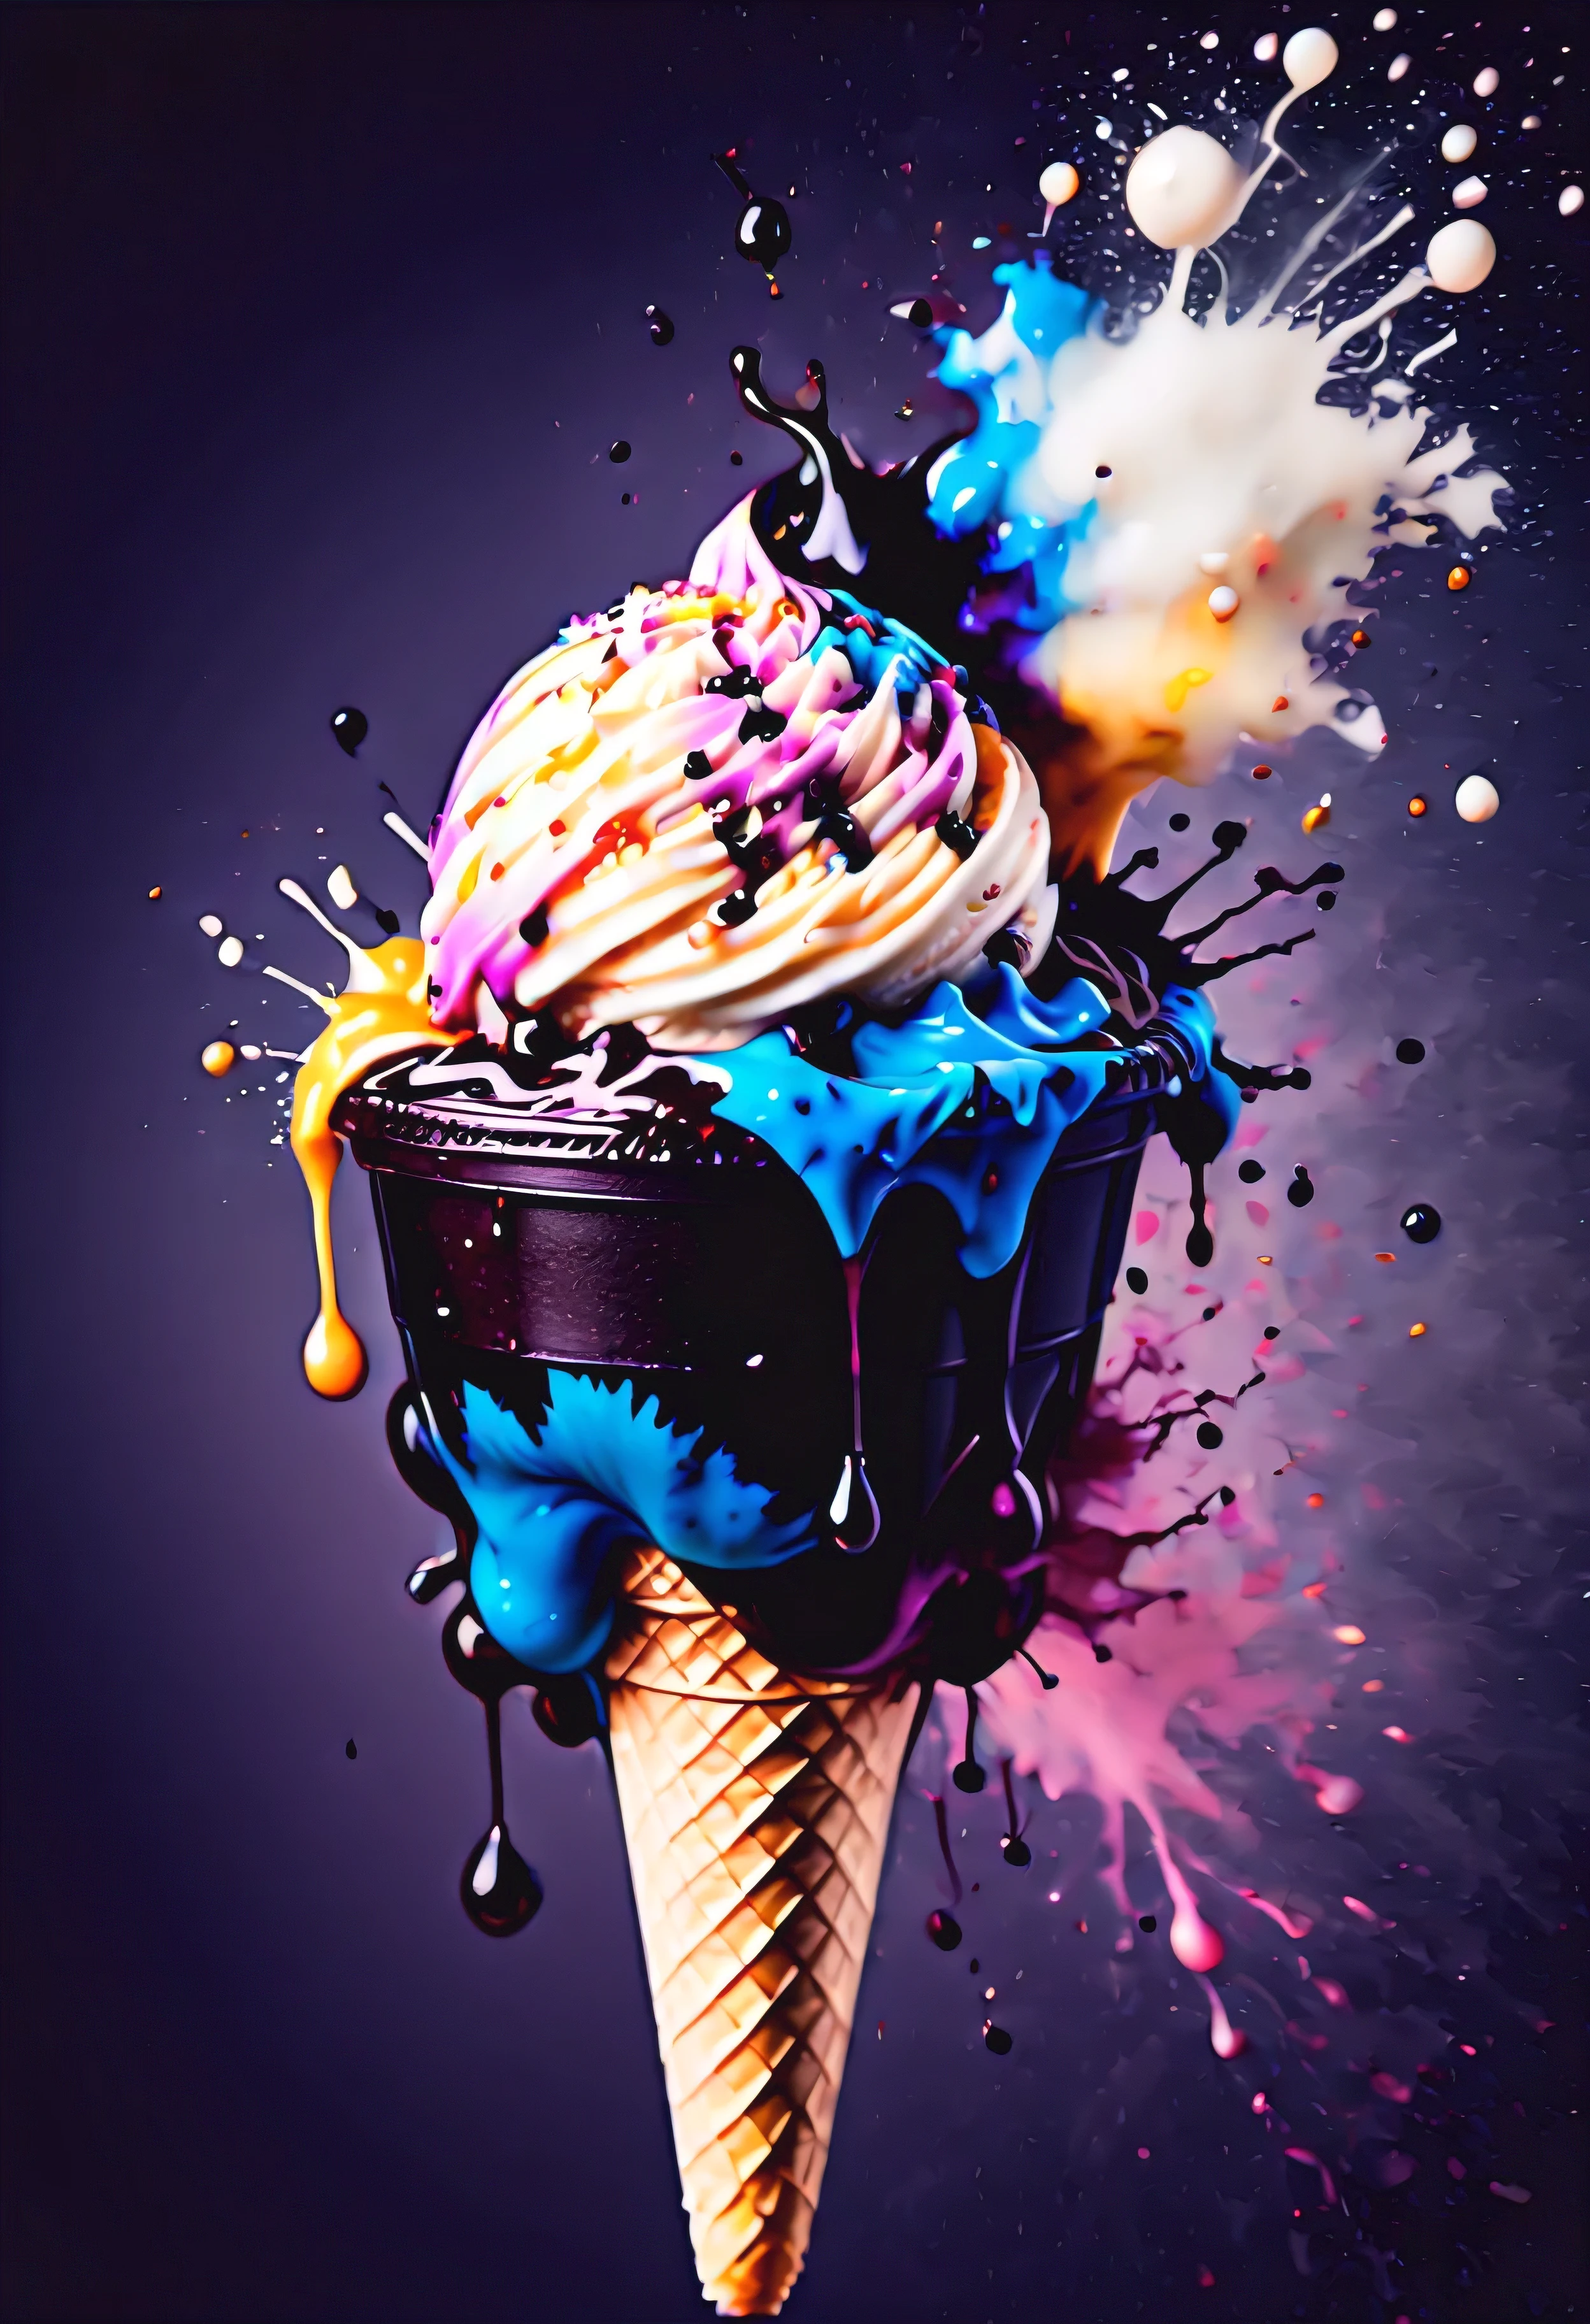 ((Masterpiece in maximum 16K resolution):1.6),((soft_color_photograpy:)1.5), ((ink_splatter_styles):1.4),((Movie-like still images and dynamic angles):1.3),| Macro shot, cinematic photo of a napolitano ice cream, ink_splatter_style, dark shot, film grain, extremely detailed, All captured with sharp focus.